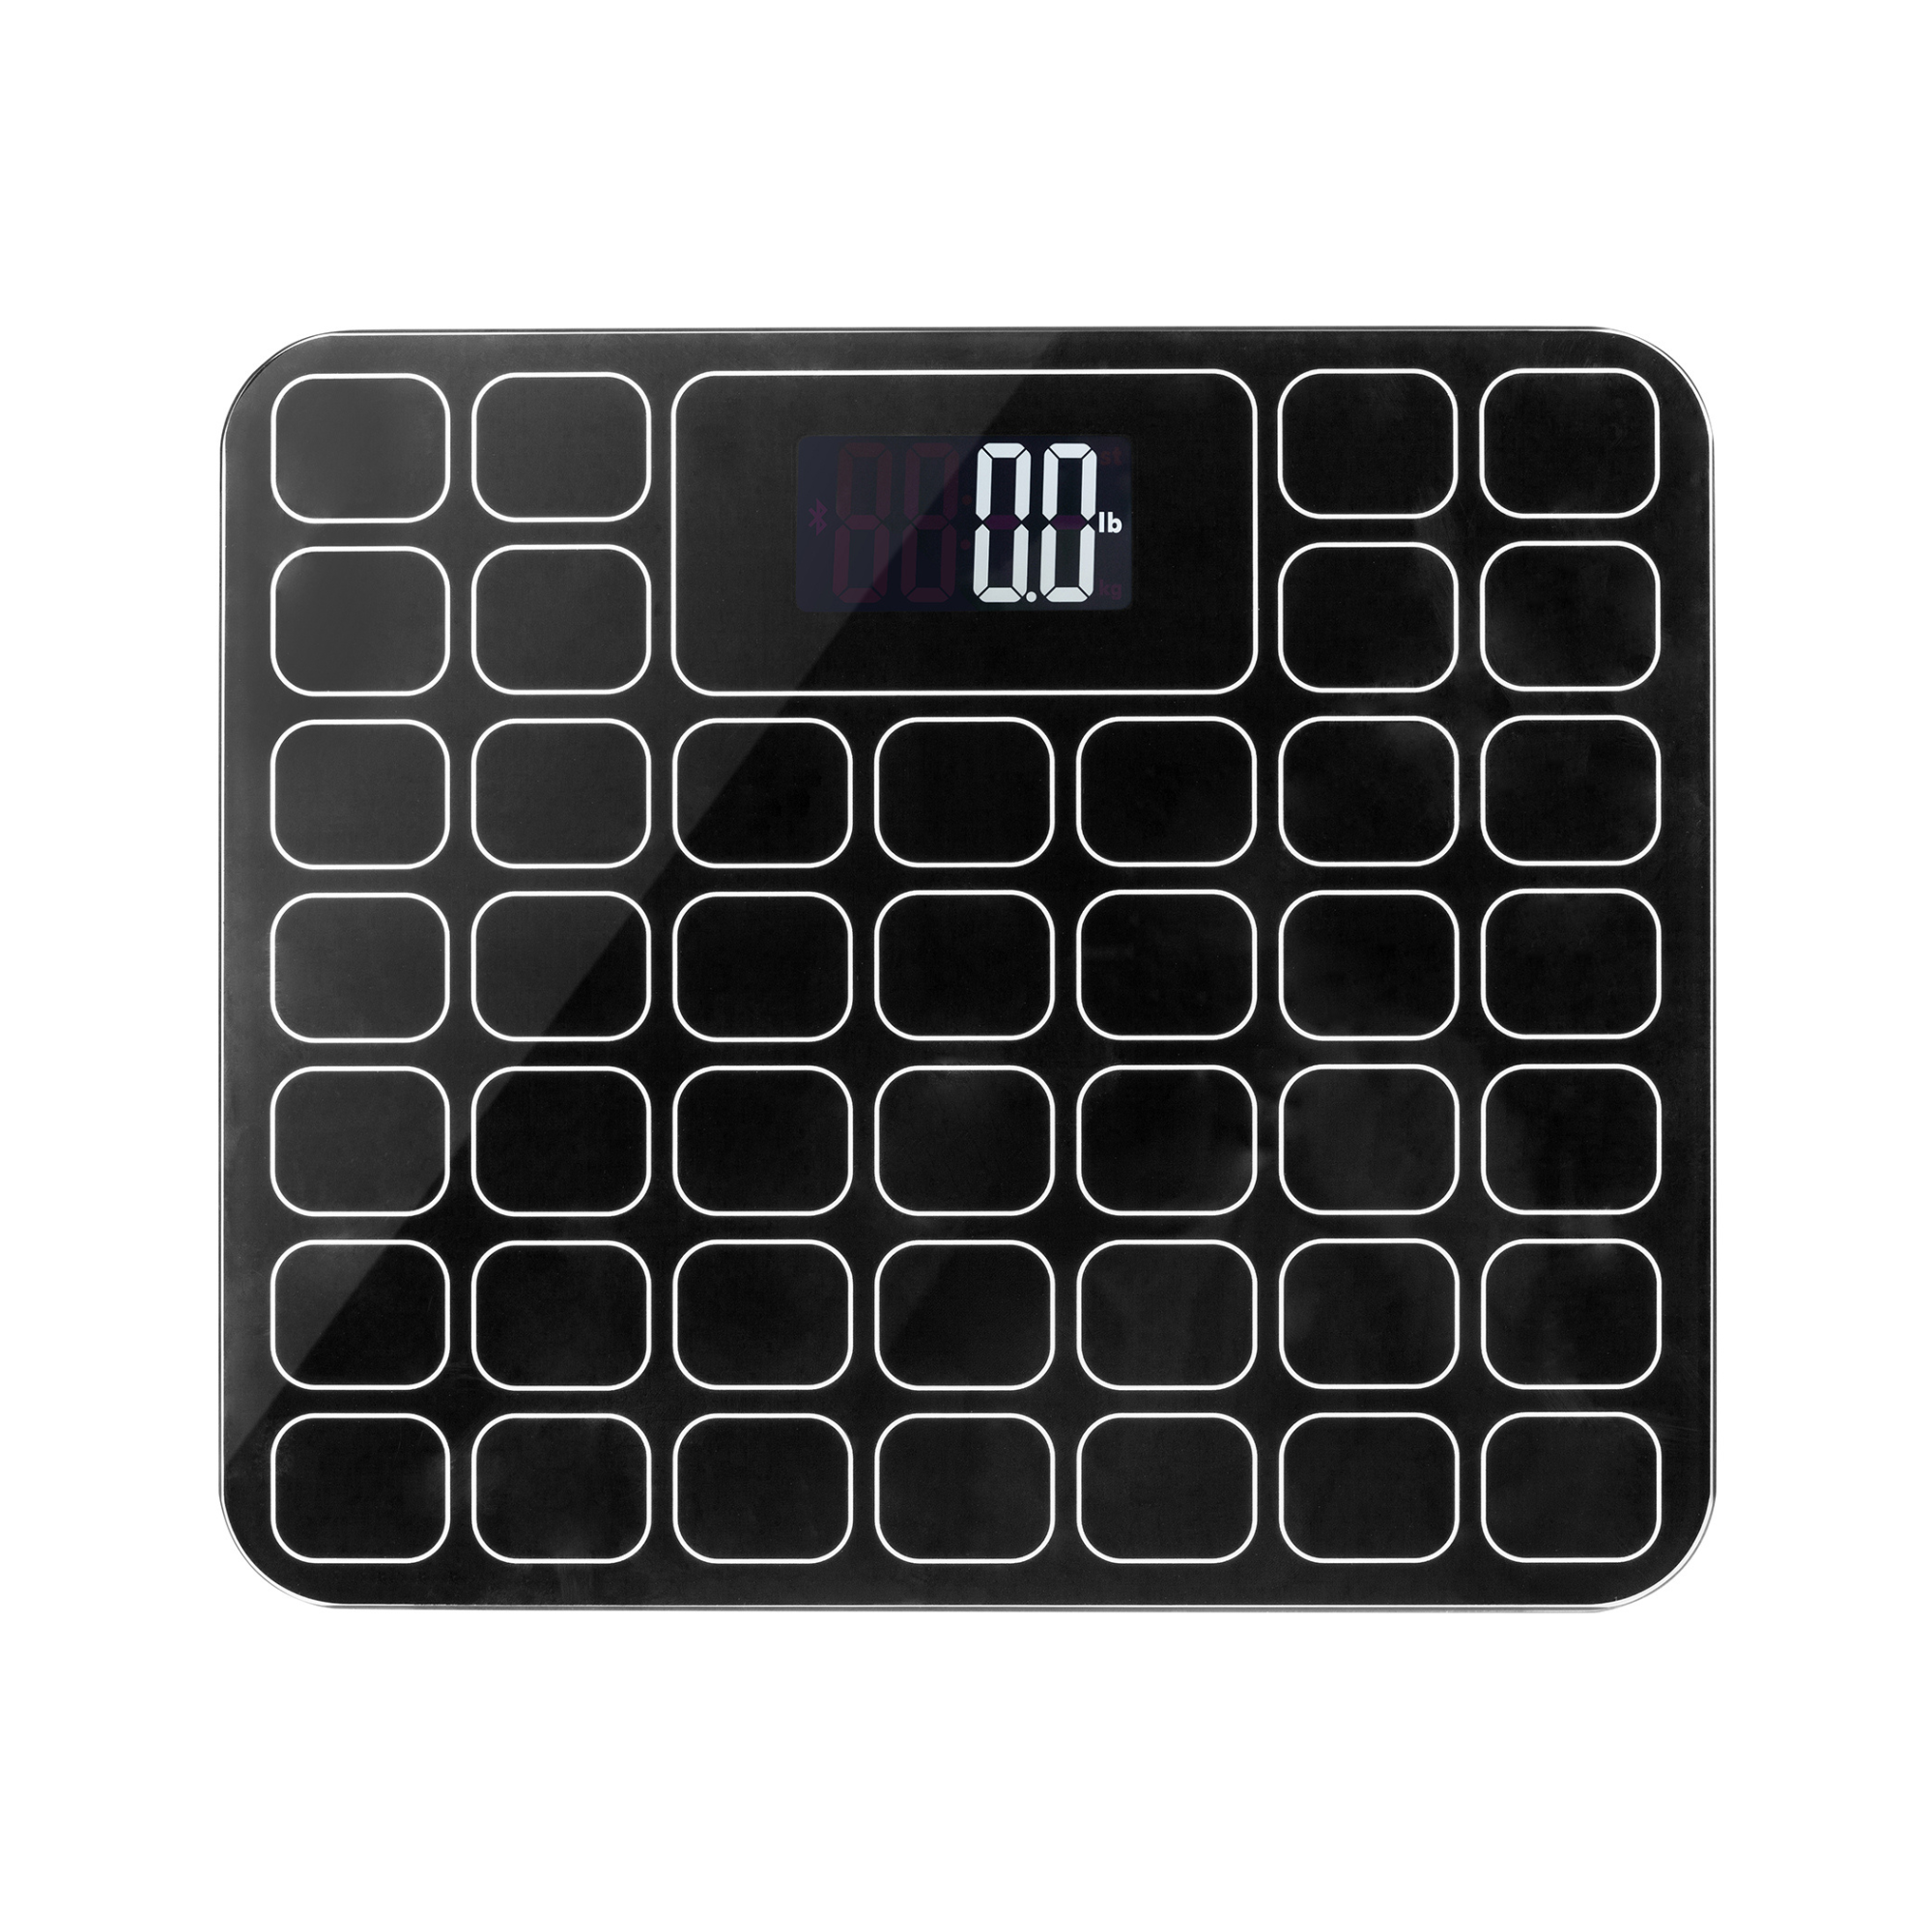 Digital Bathroom Scale for Body Weight, Auto Step-On Design, Ultra Thin, Heavy Duty, Black Grid by Prominence Home